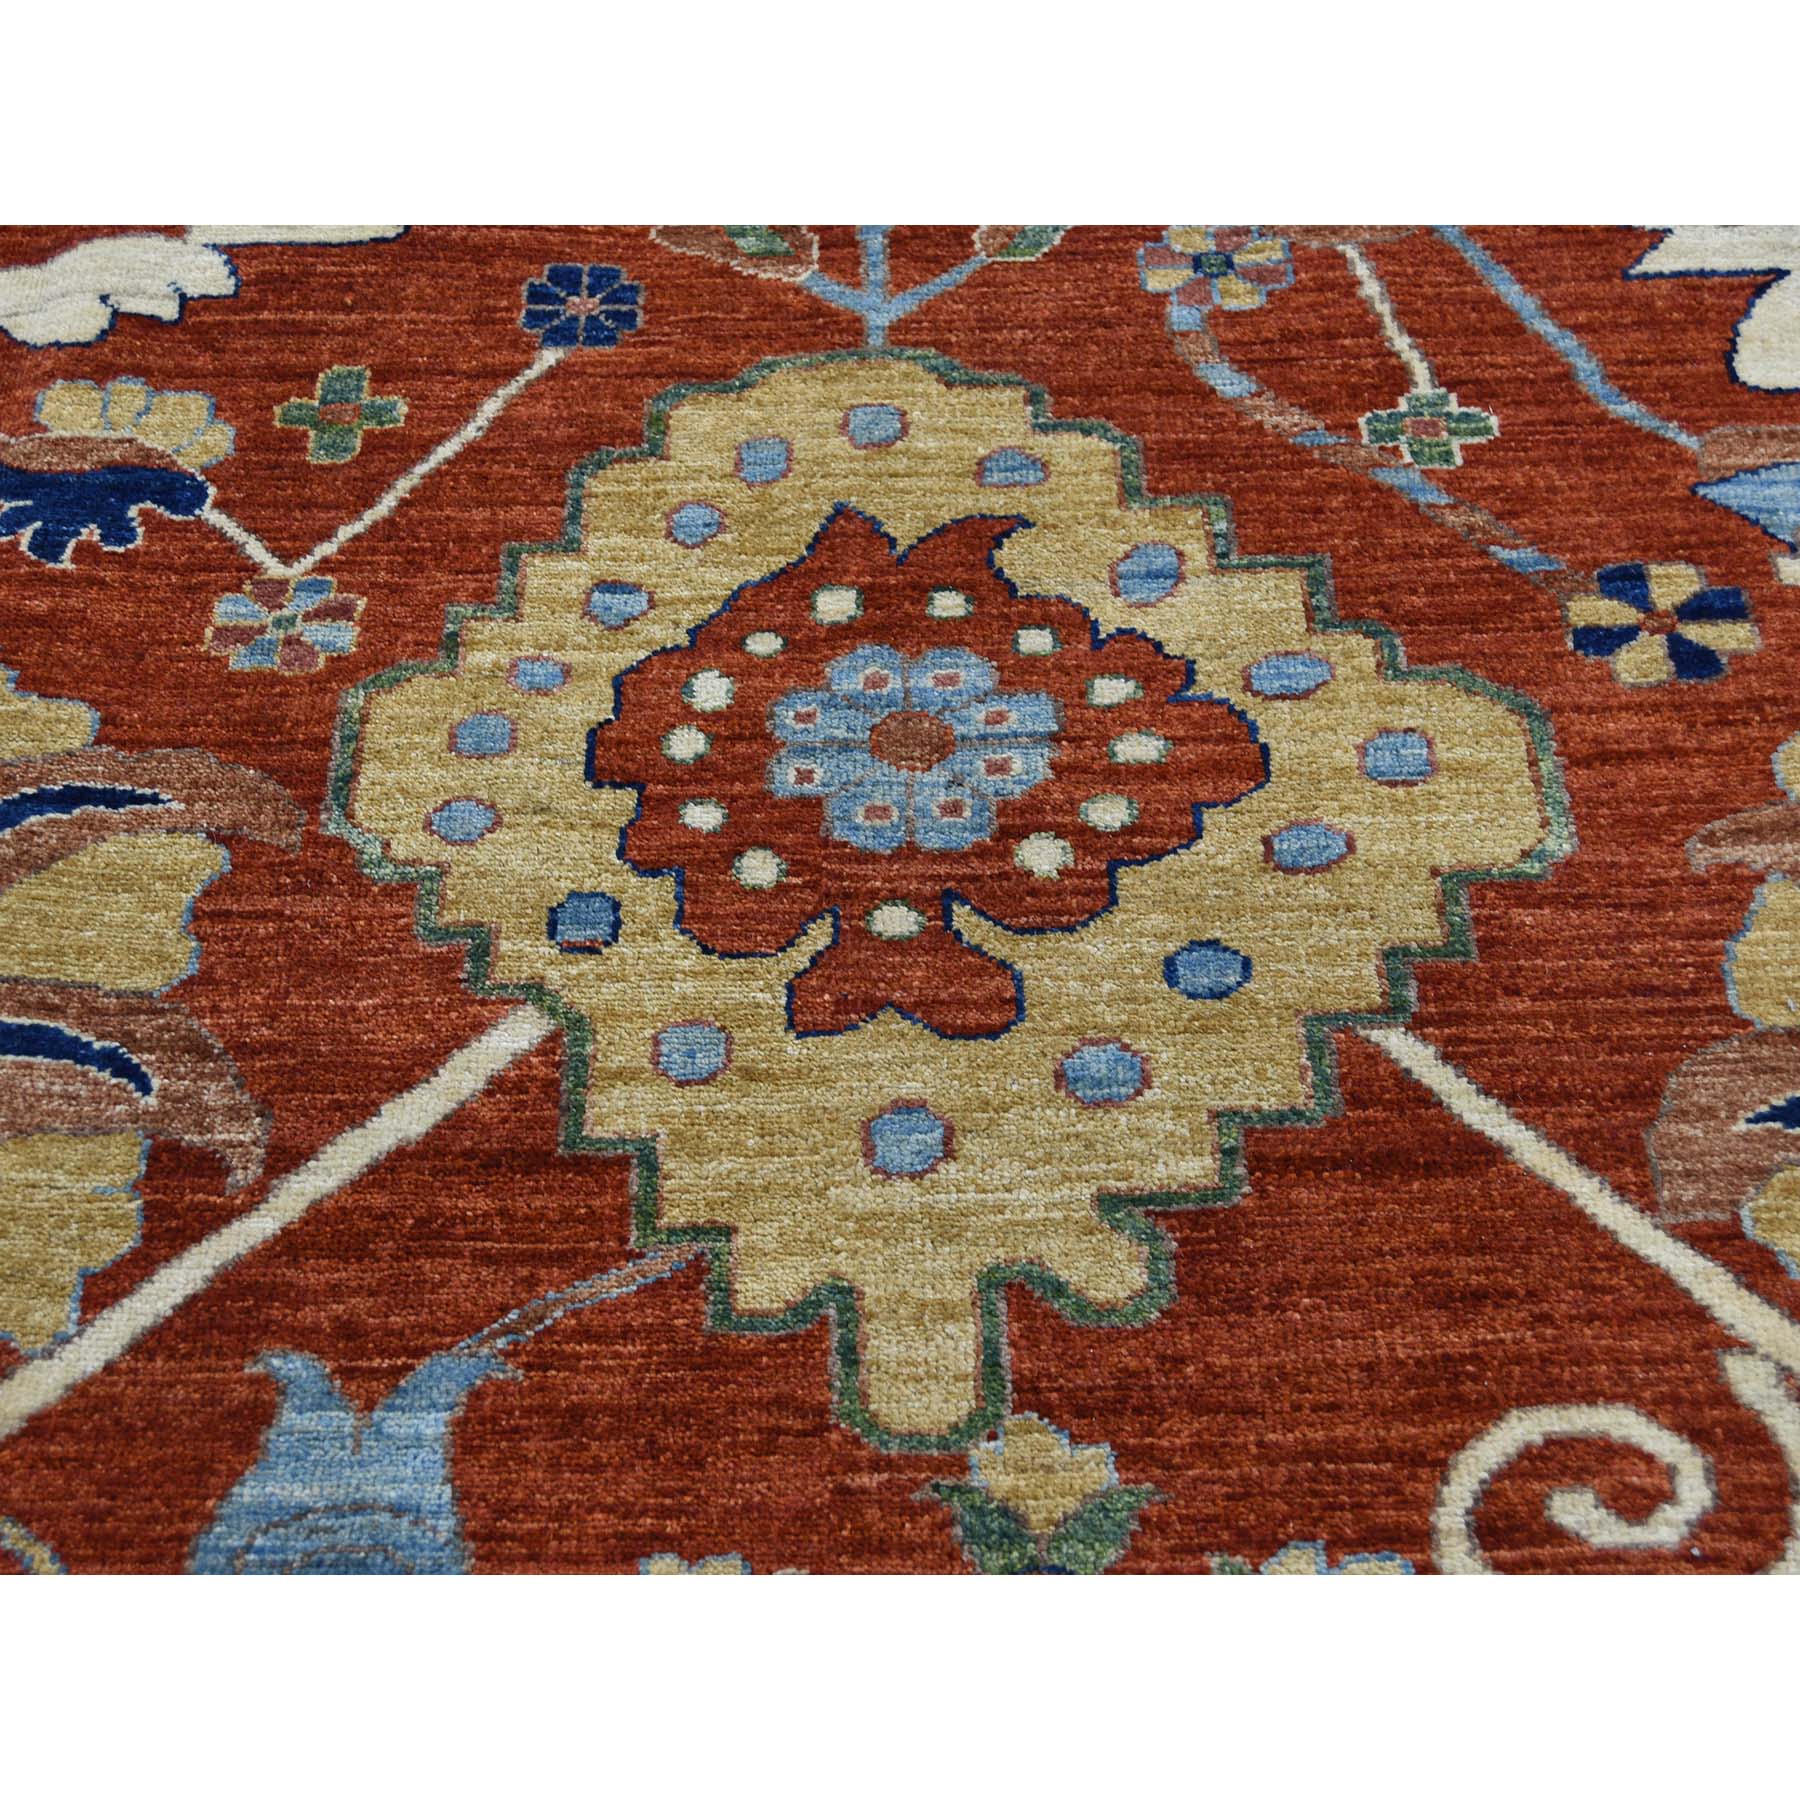 9-4 x 11-9- Hand-Knotted Peshawar Mahal Design With Wide Border Oriental Rug 